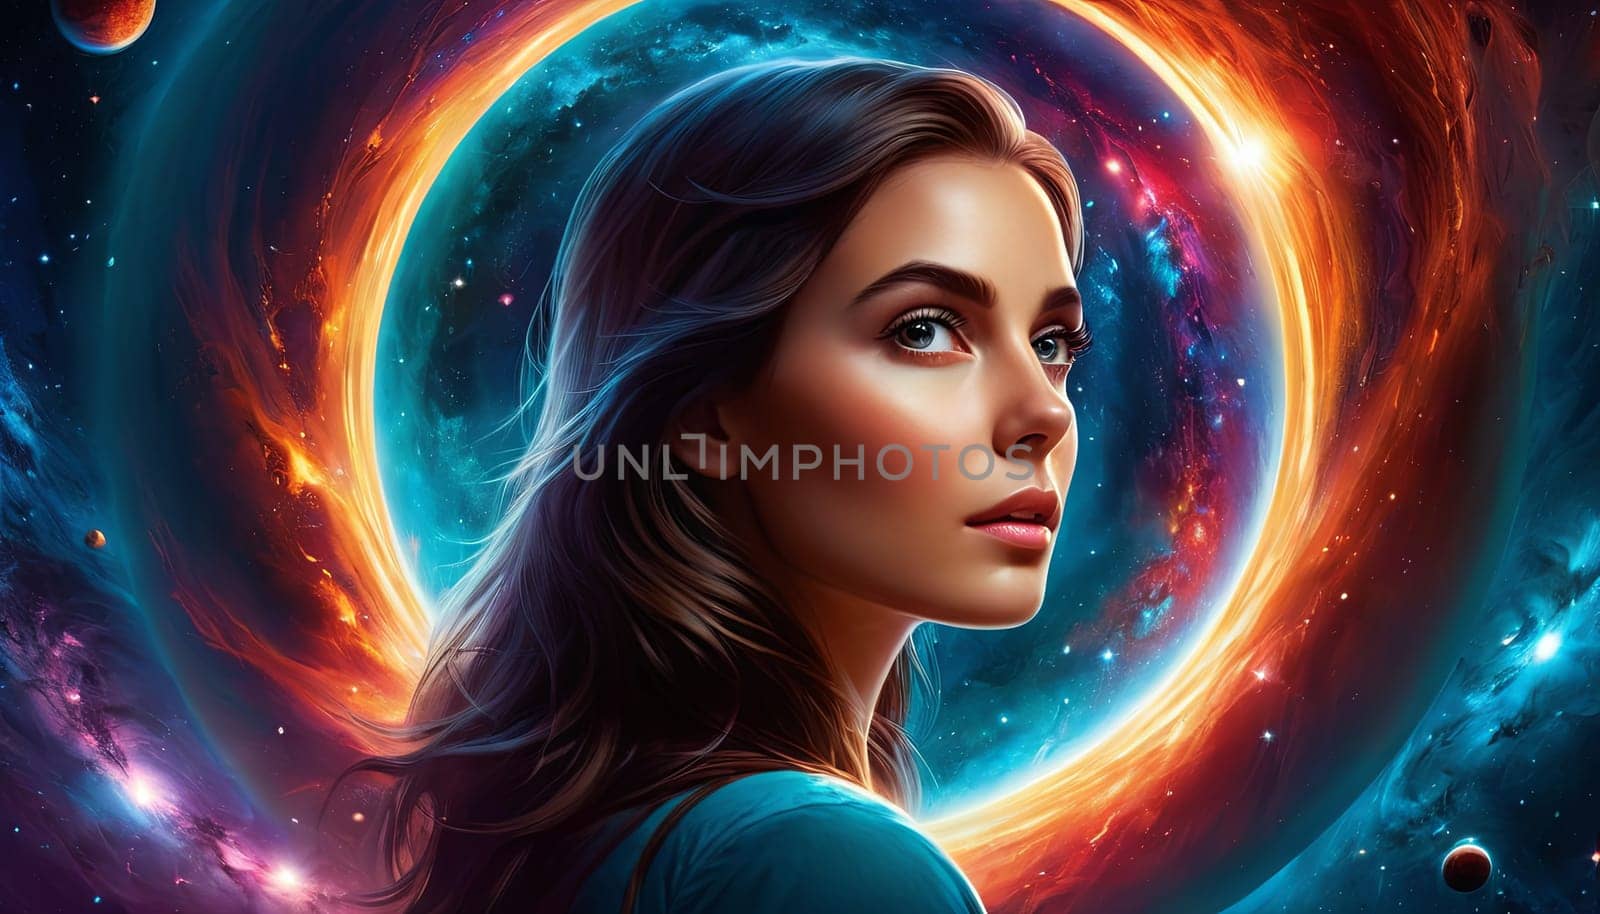 Woman amidst vibrant cosmic scenery, planets orbiting nearby. Represents intersection of humanity and infinite universe. Ideal for themes of exploration, mystery